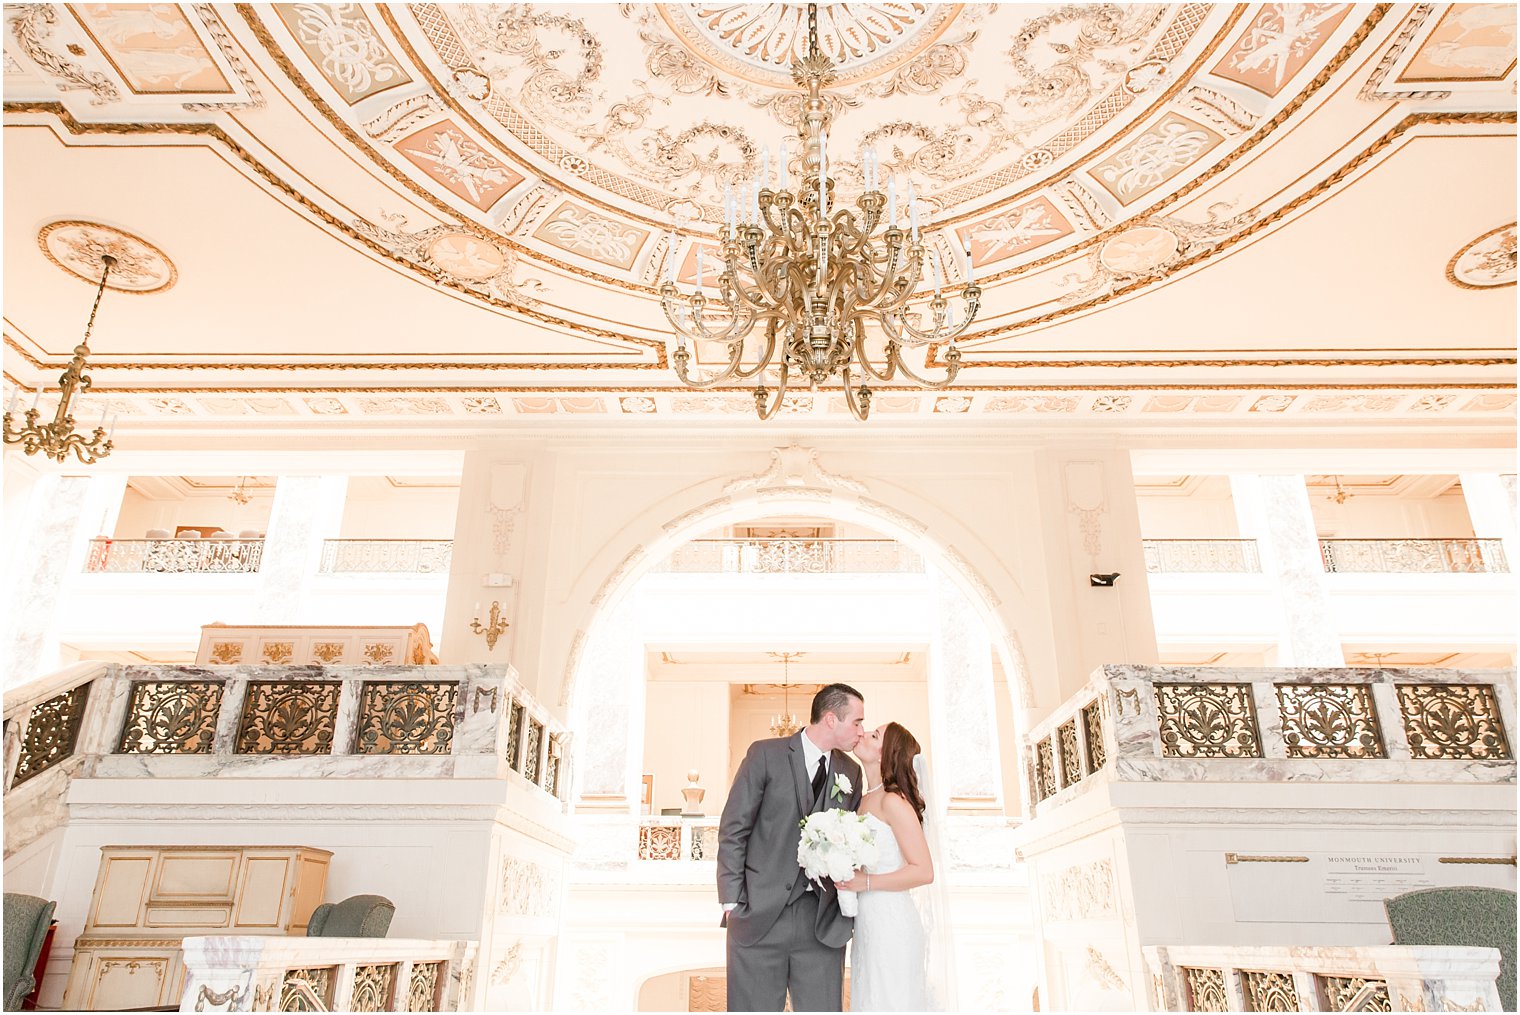 Romantic bride and groom photo at Monmouth University